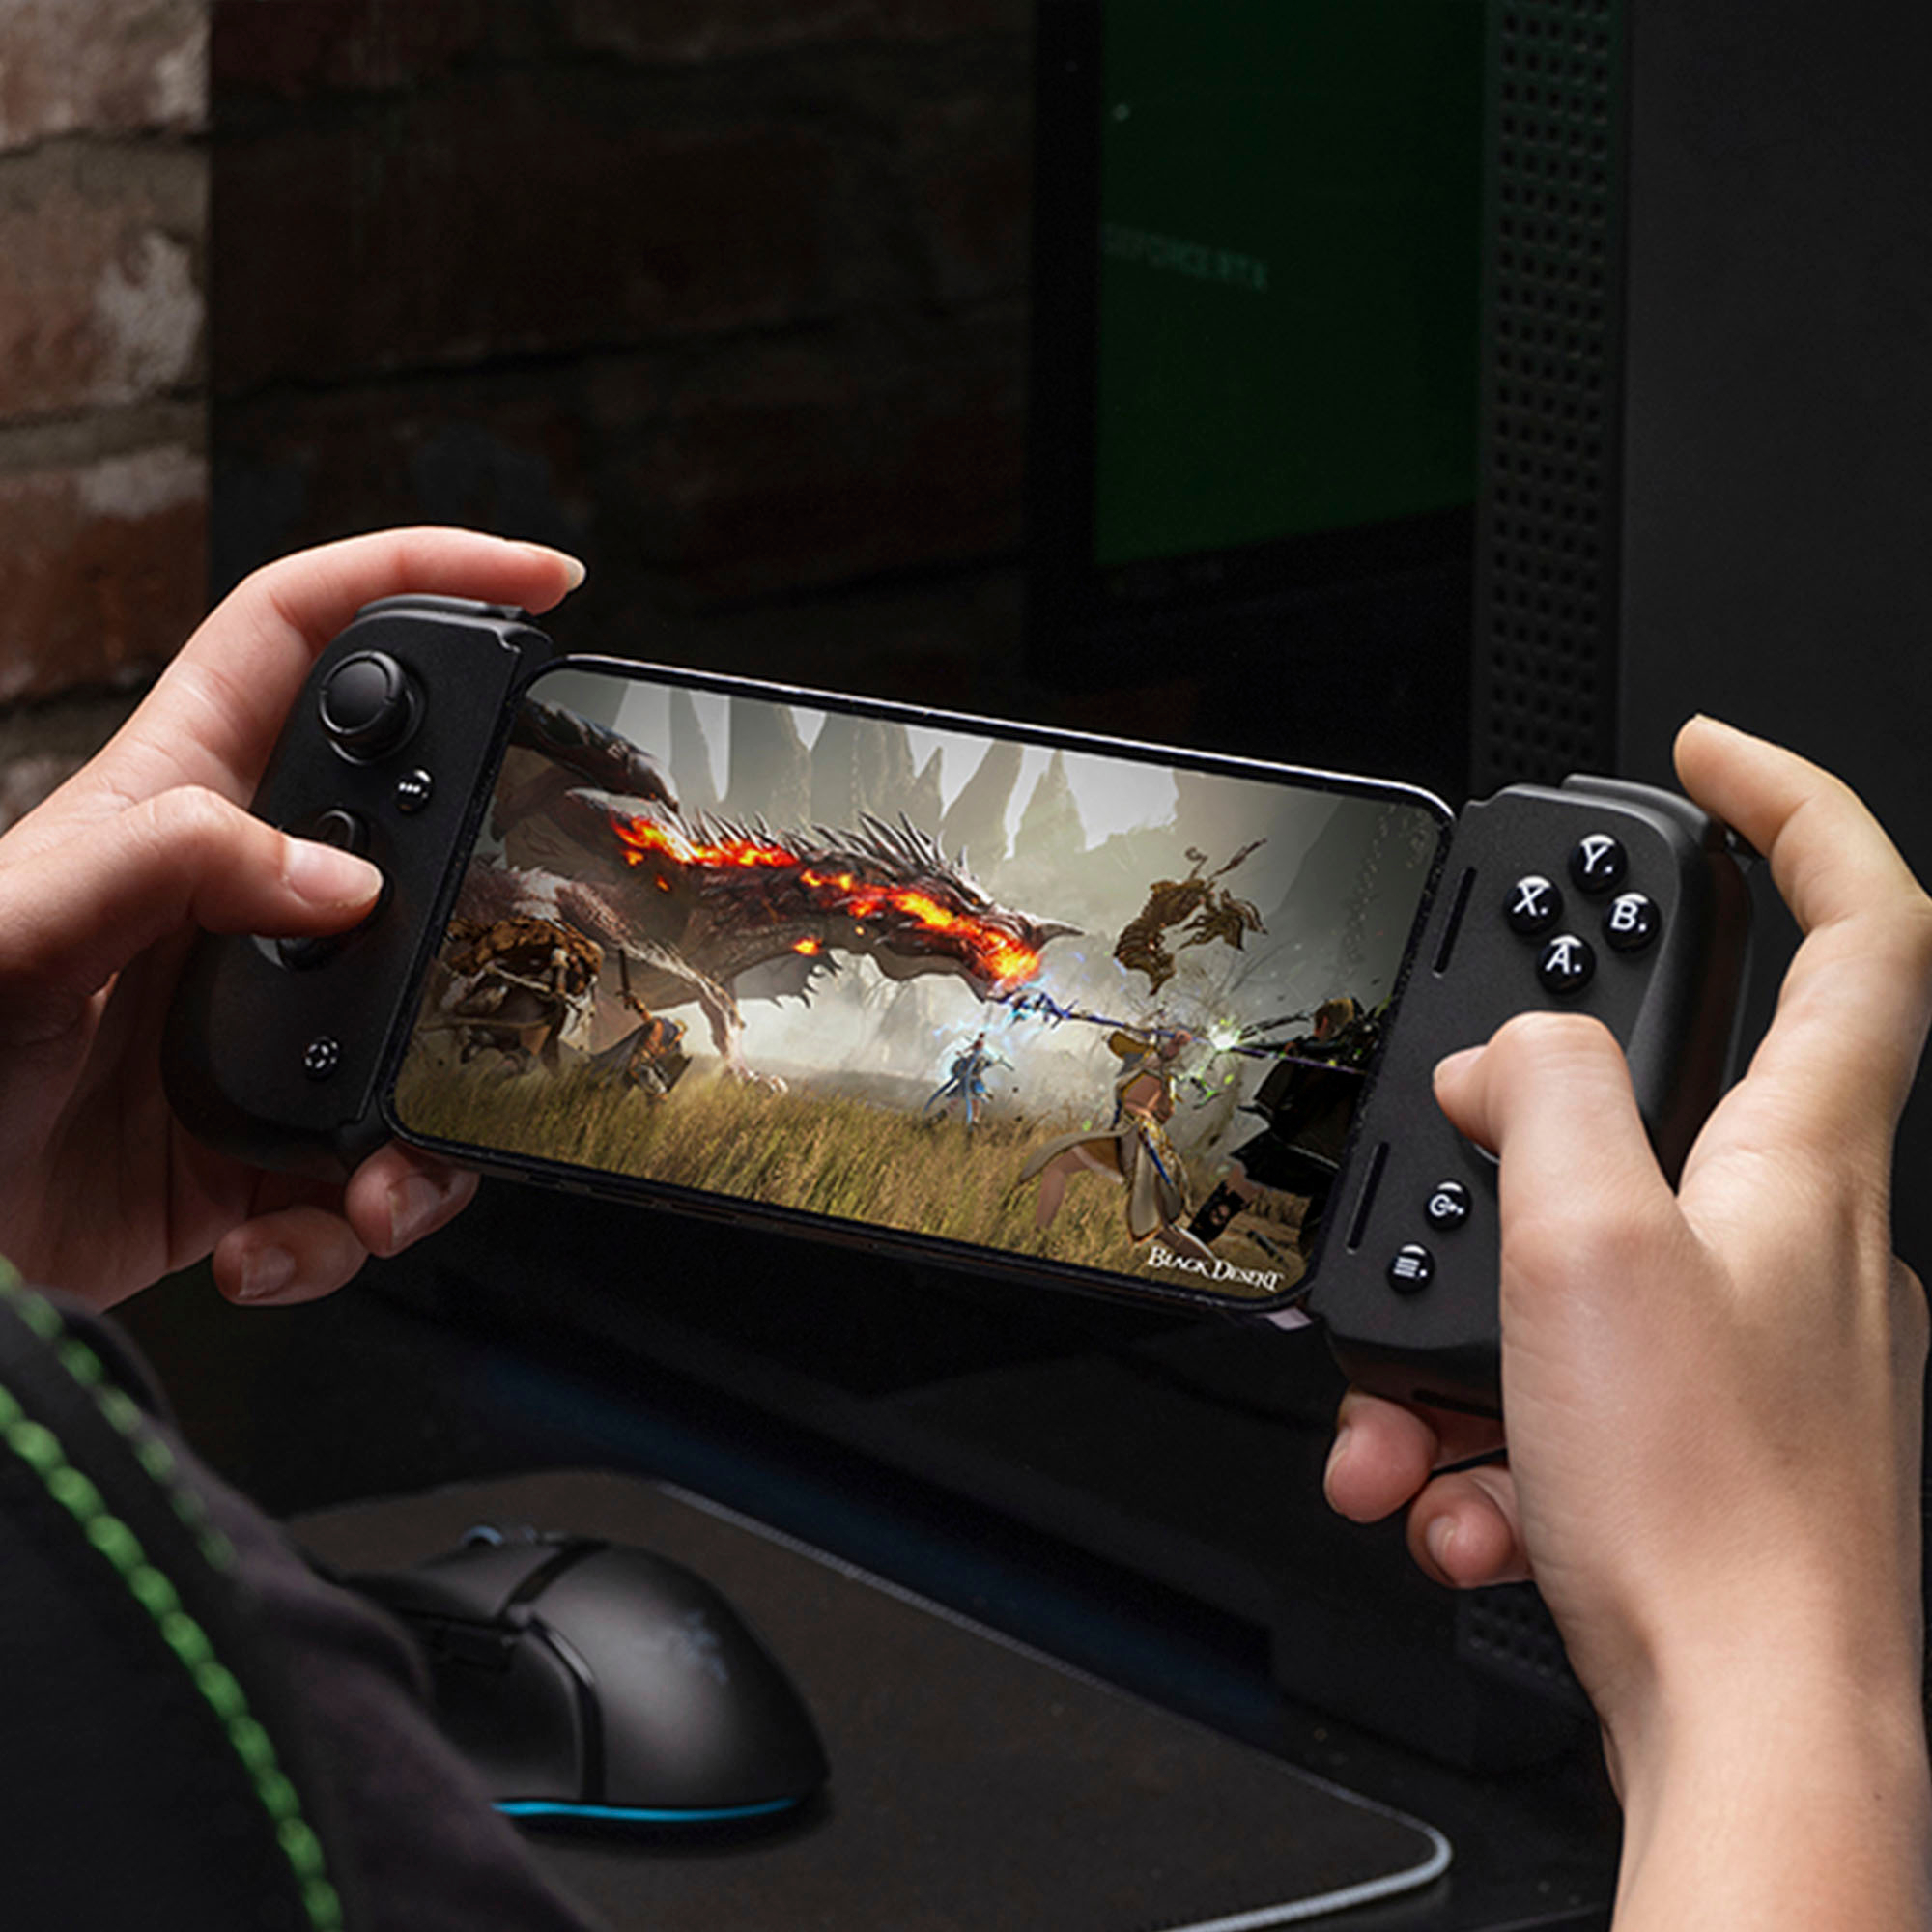 Razer Kishi Review - A Great Gaming Controller for Android Smartphones